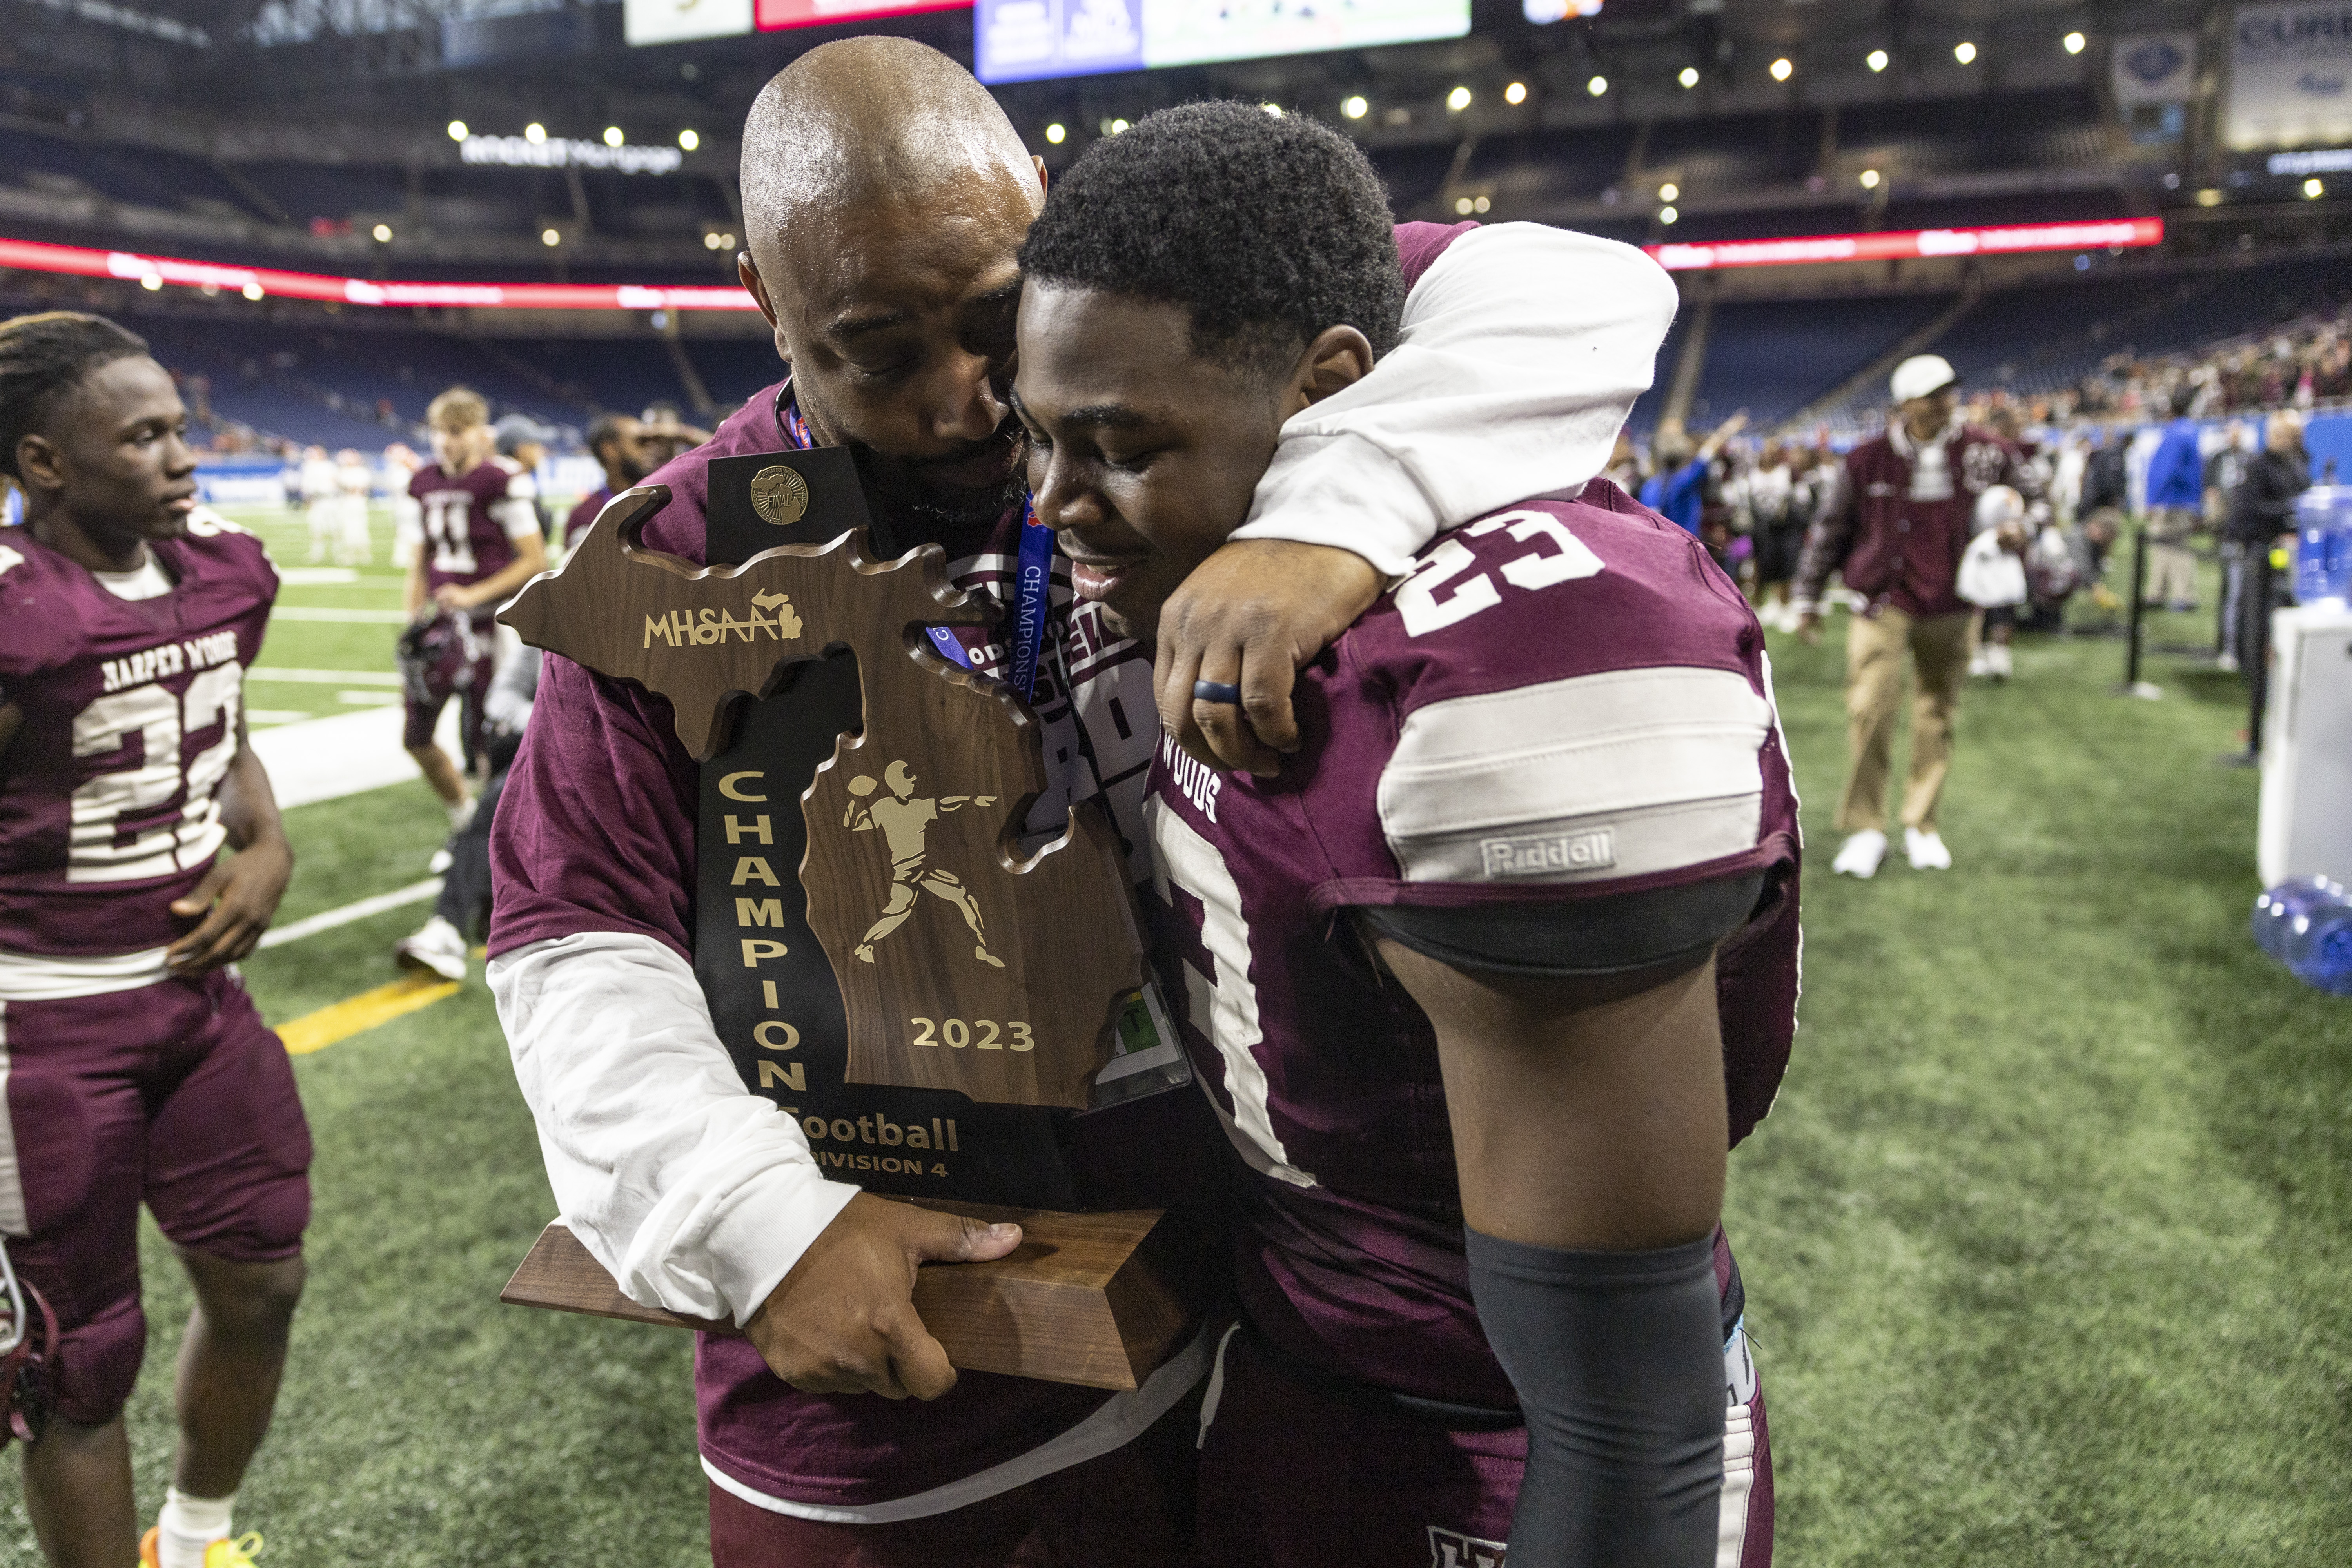 Our favorite photos from the 2023 MHSAA football finals - mlive.com